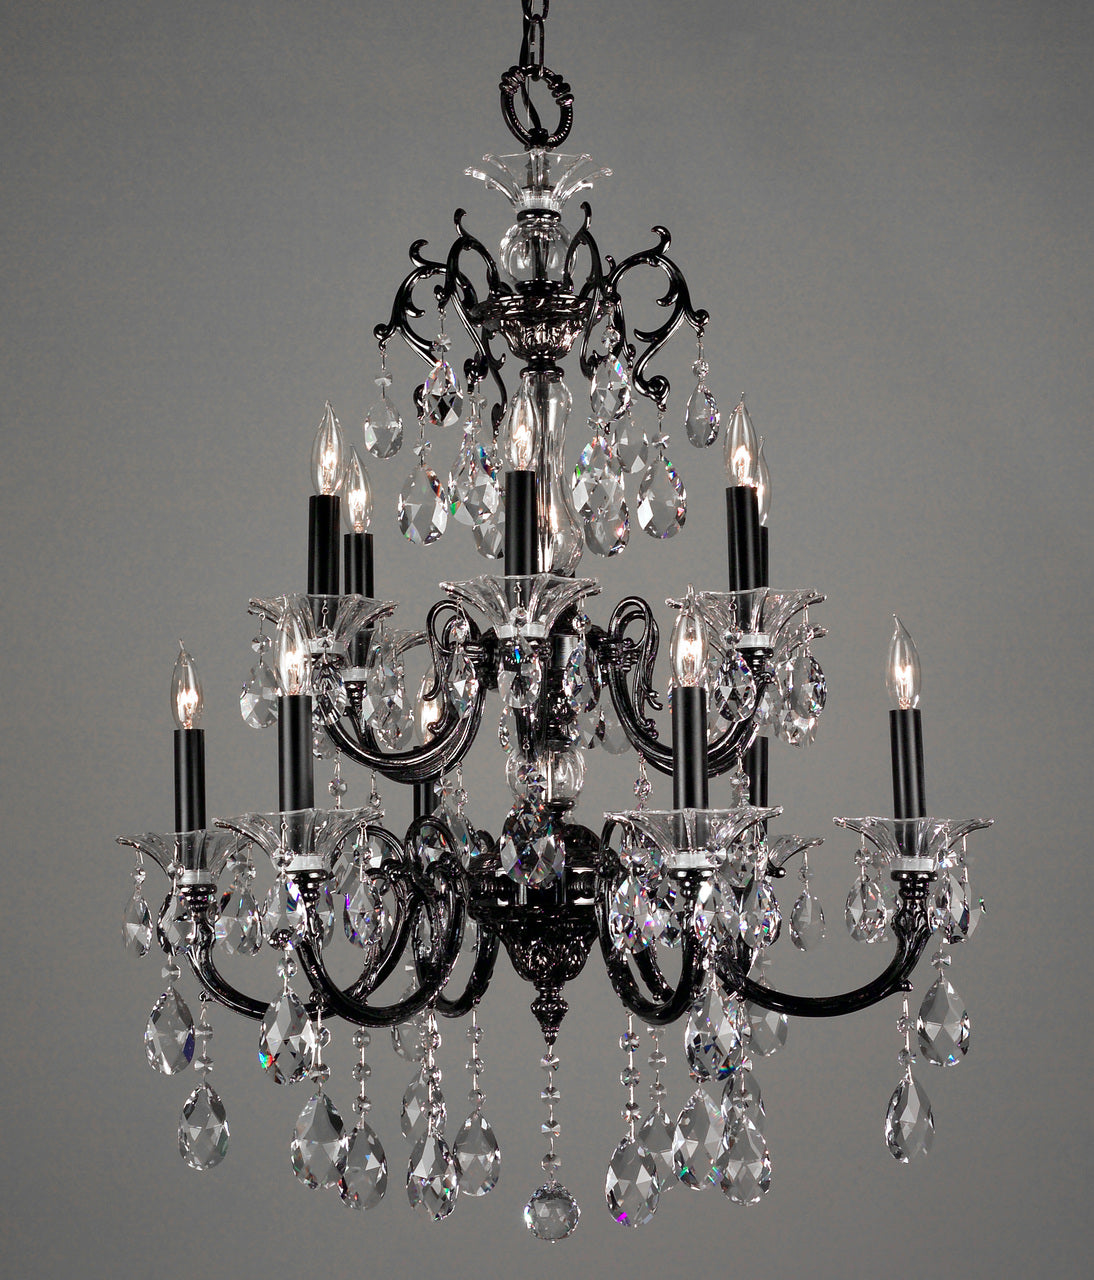 Classic Lighting 57062 MS CBK Via Lombardi Crystal Chandelier in Millennium Silver (Imported from Spain)